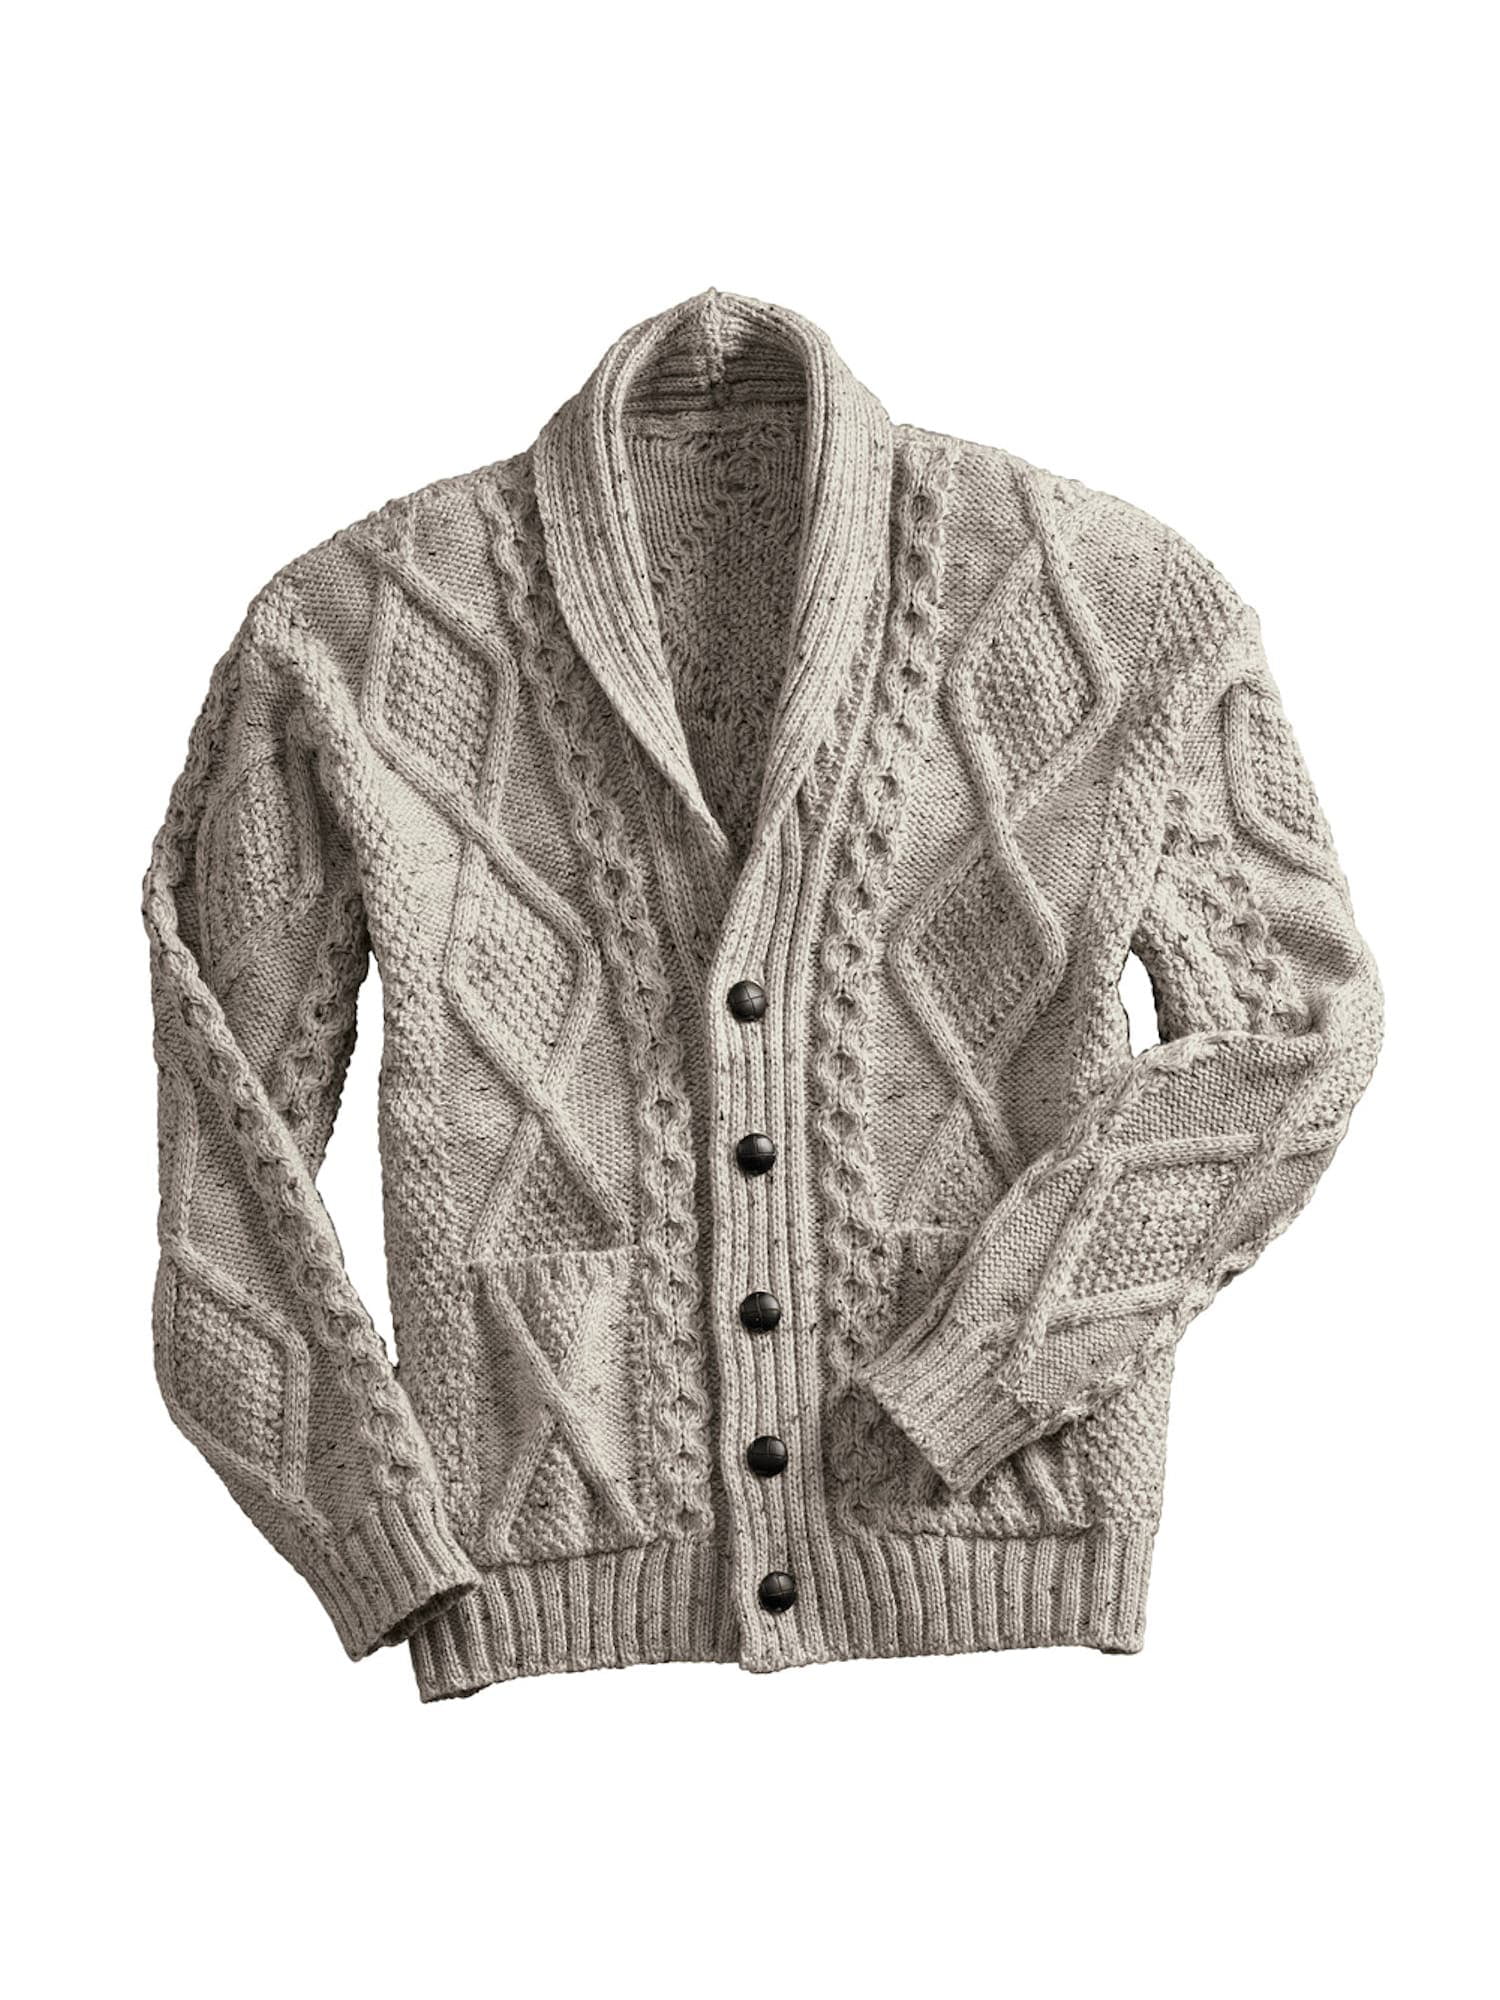 Oatmeal Large West End Knitwear Mens Aran Shawl Collar Cable Knit Cardigan Sweater 